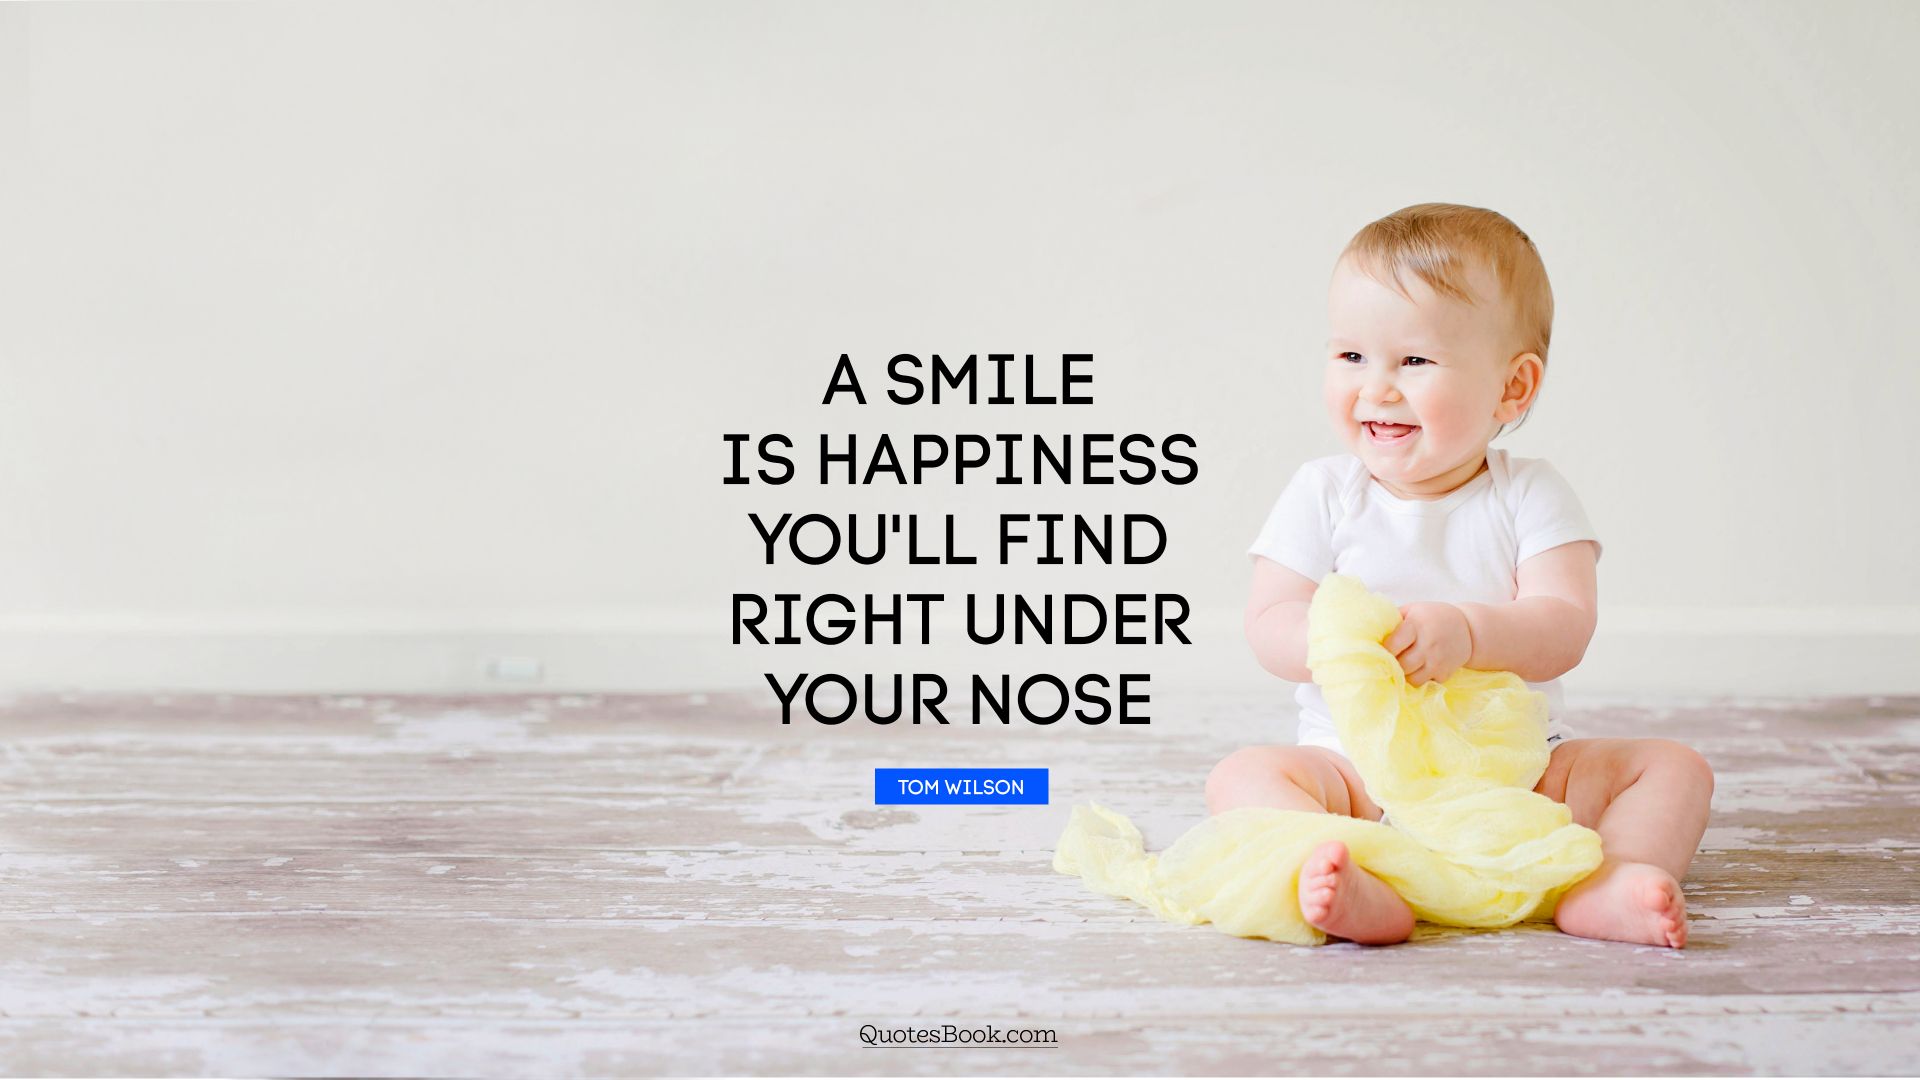 A smile is happiness you'll find right under your nose. - Quote by Tom Wilson